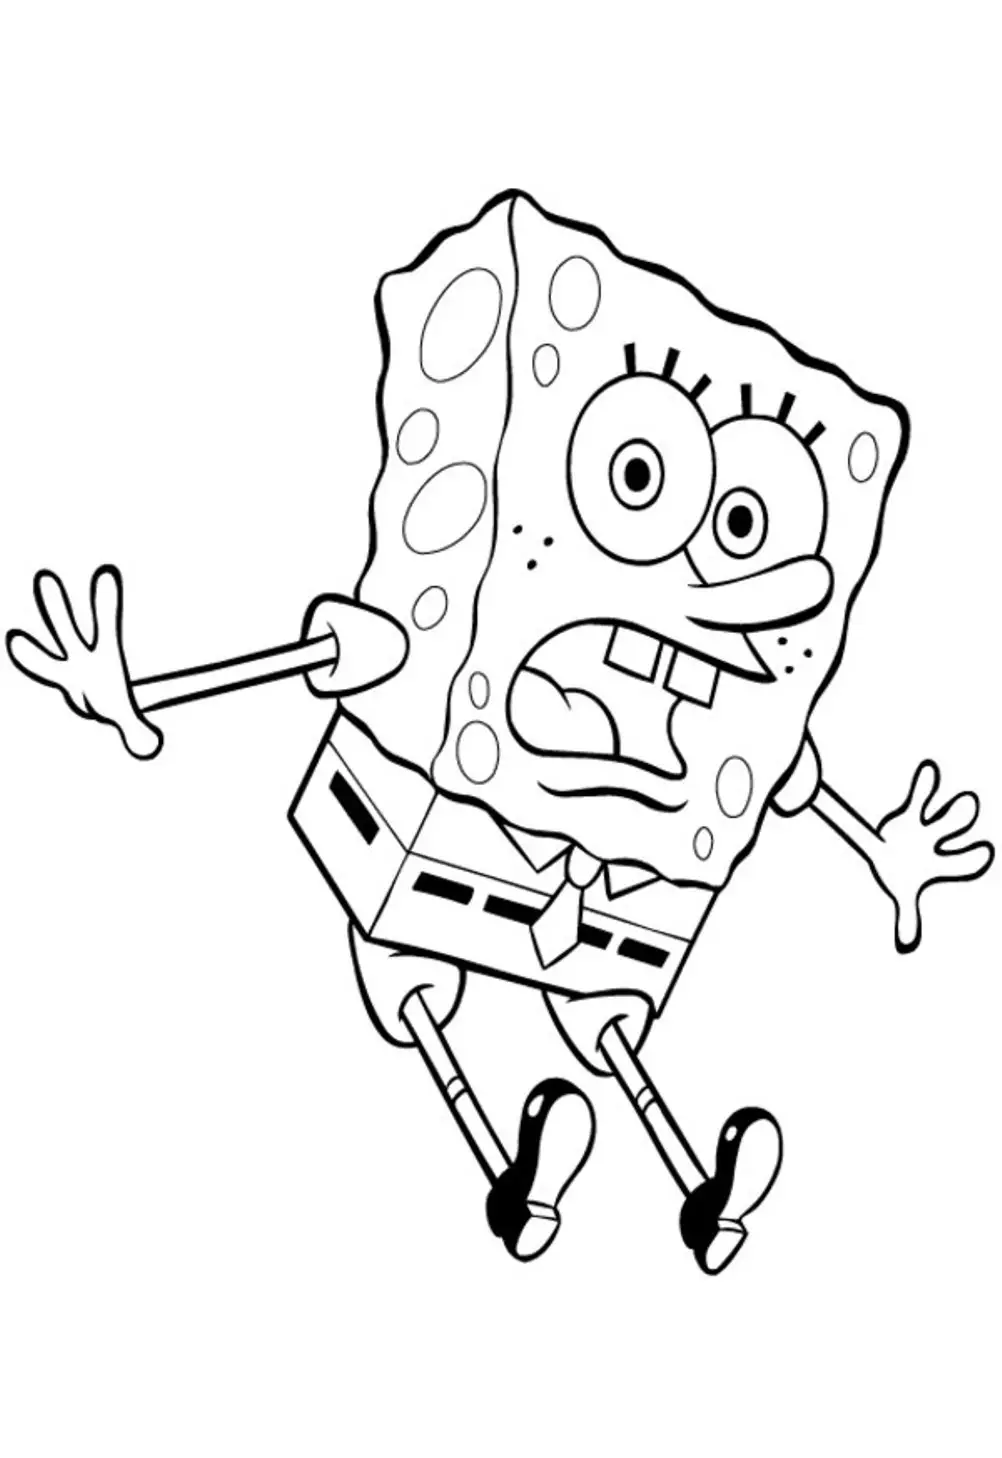 Funny Spongebob Coloring Pages Printables 84